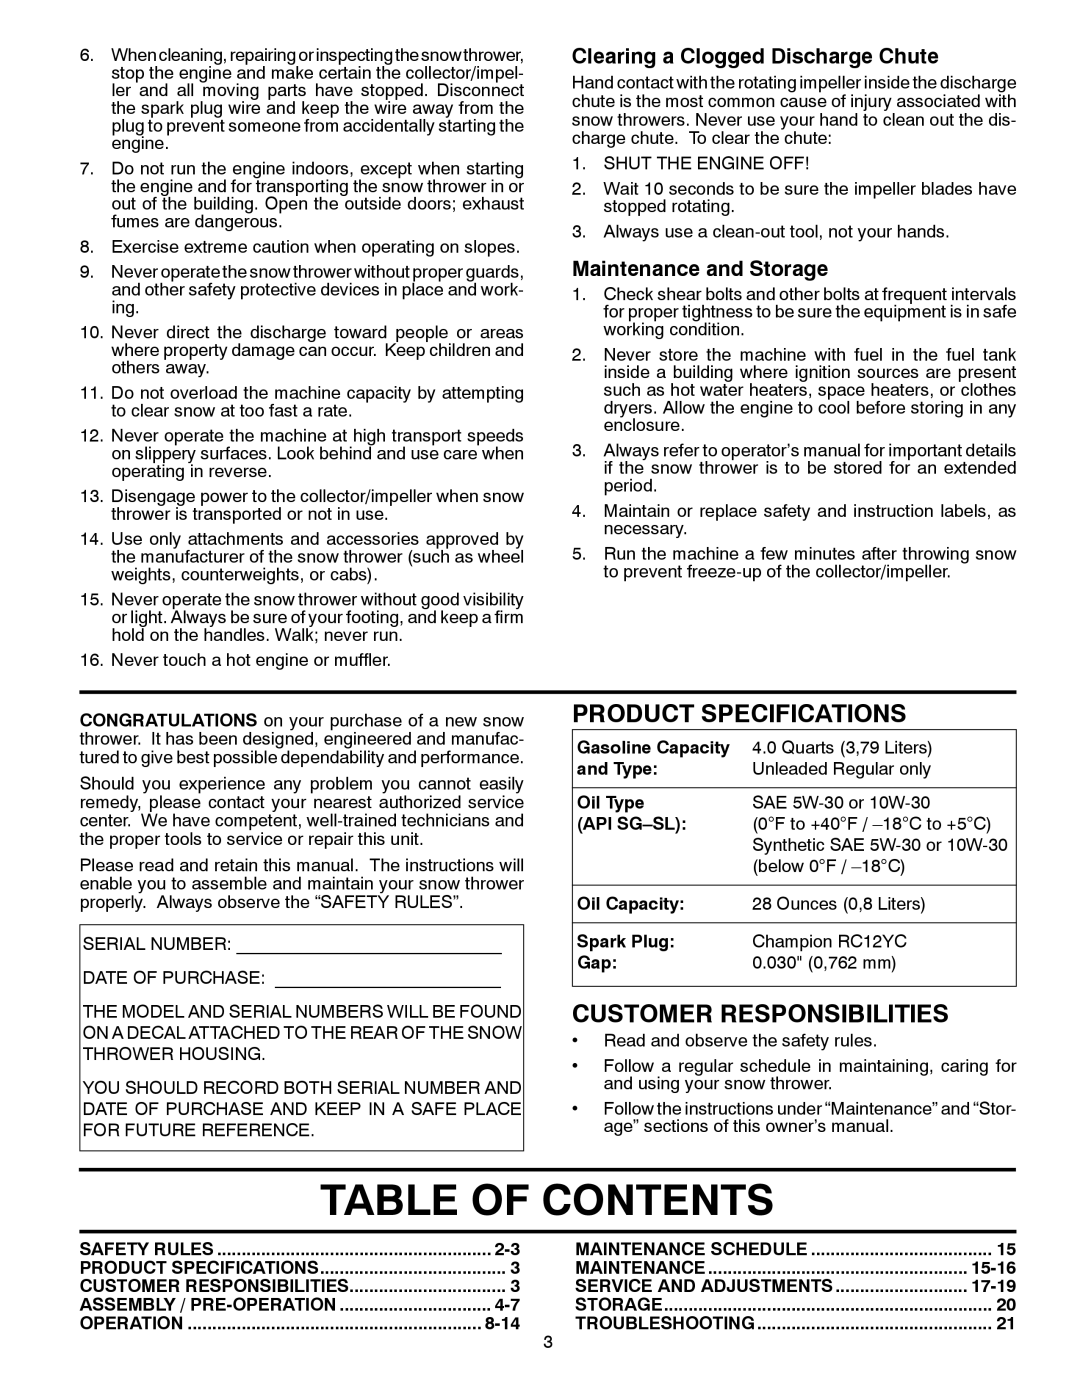 Husqvarna 13524SB-XLS owner manual Table Of Contents, Clearing a Clogged Discharge Chute, Maintenance and Storage 